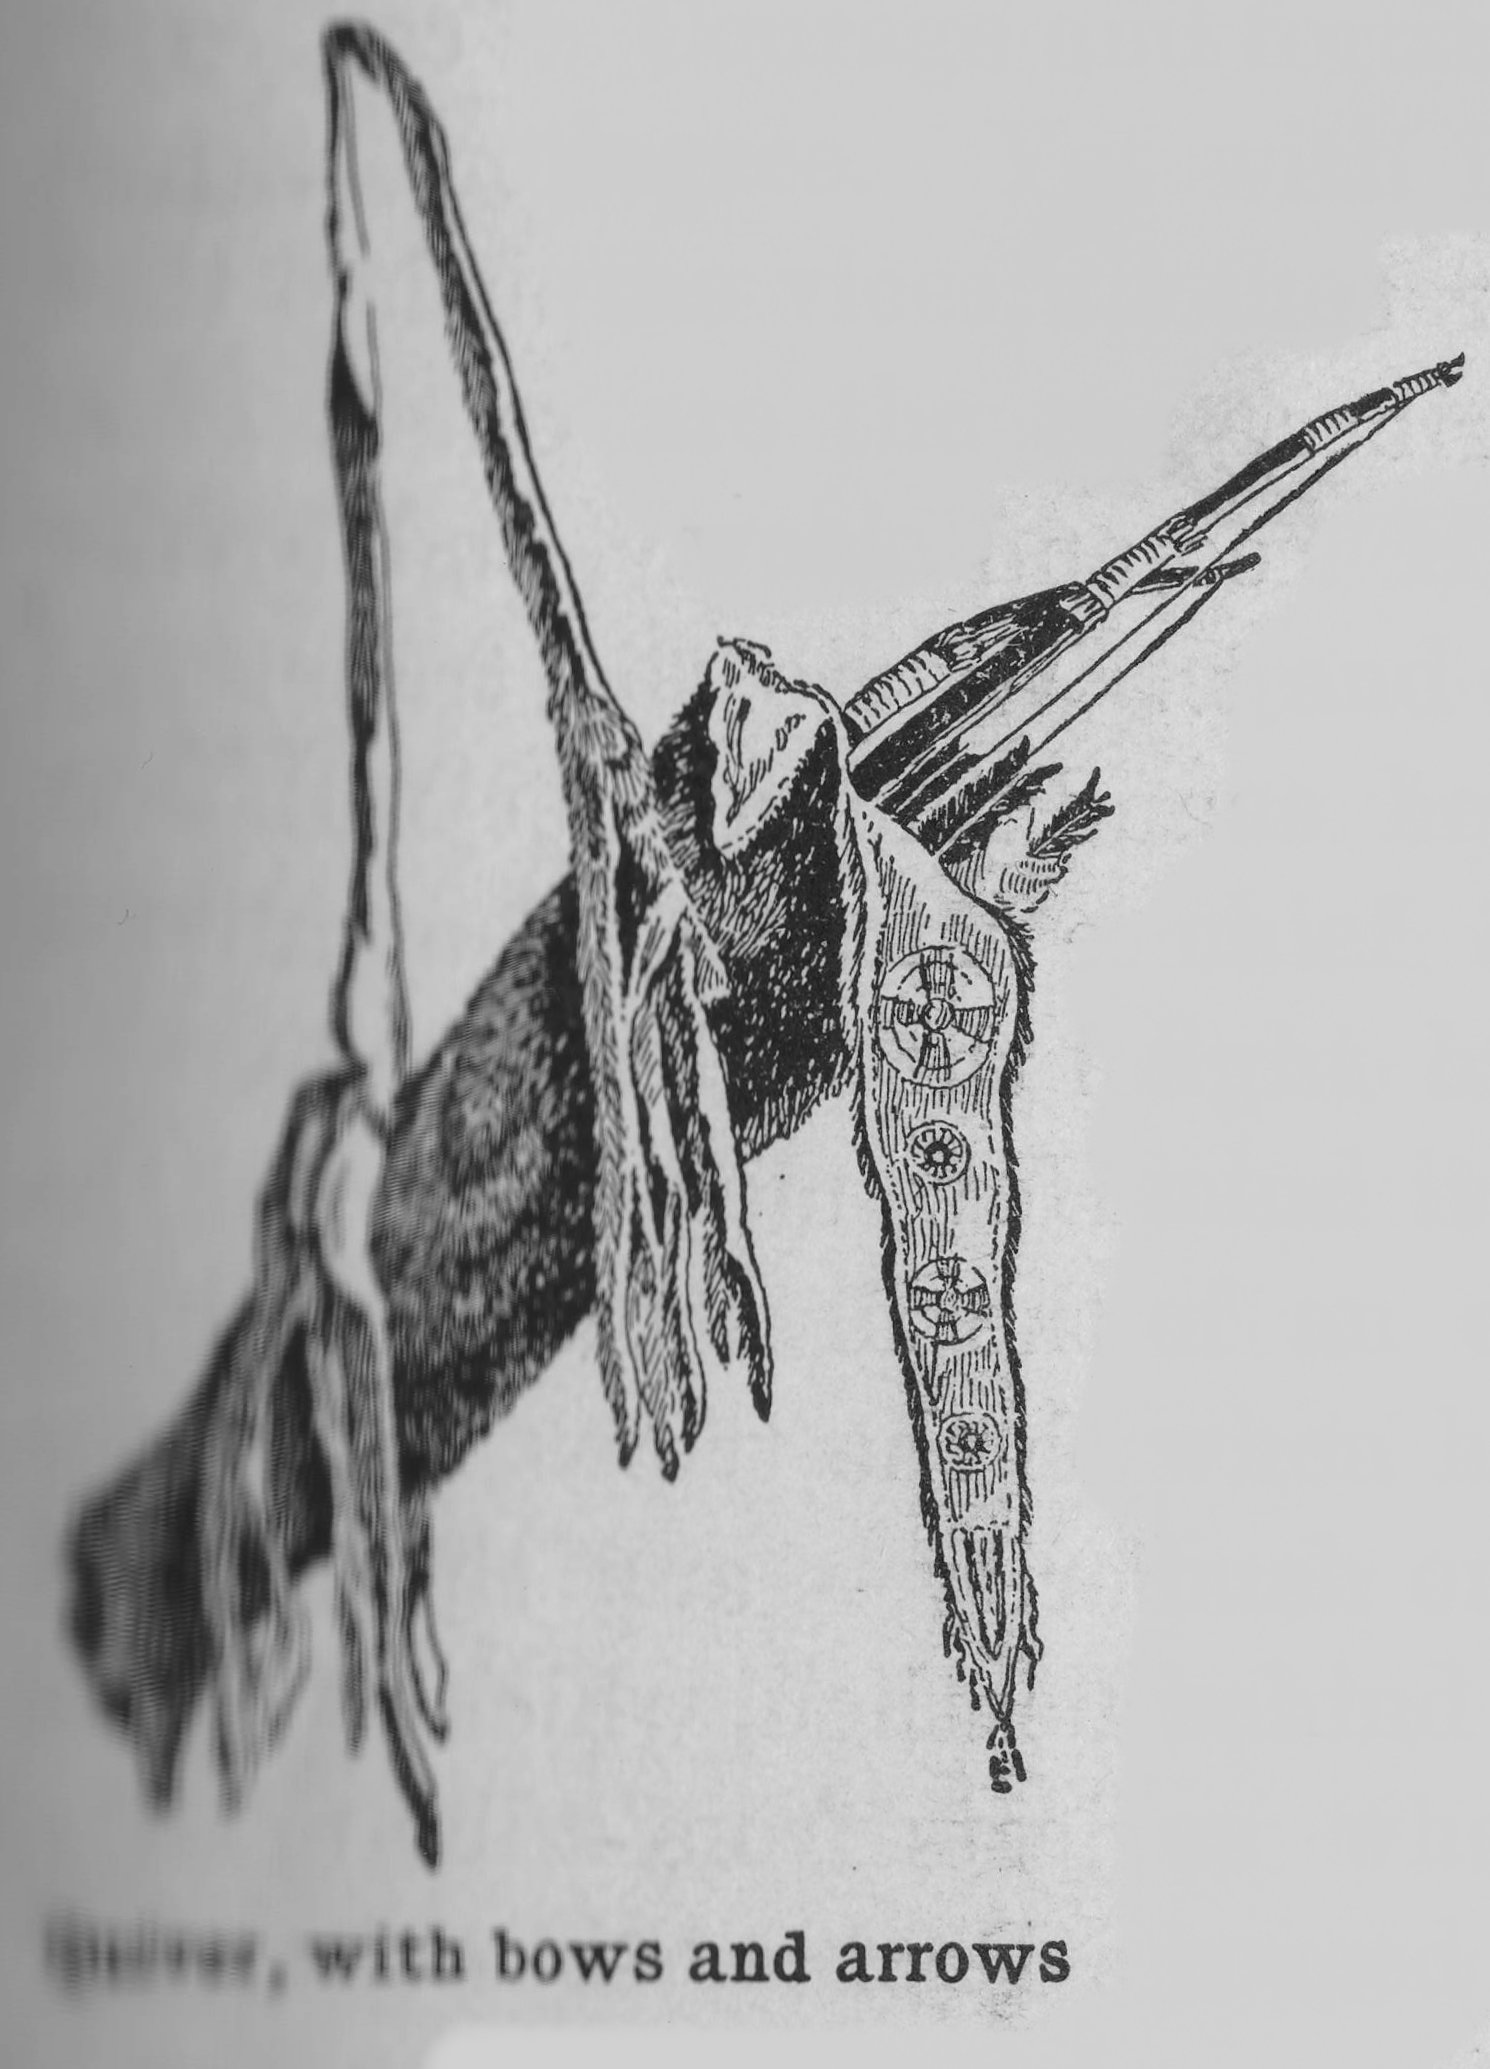 silhouette of a bow and quiver